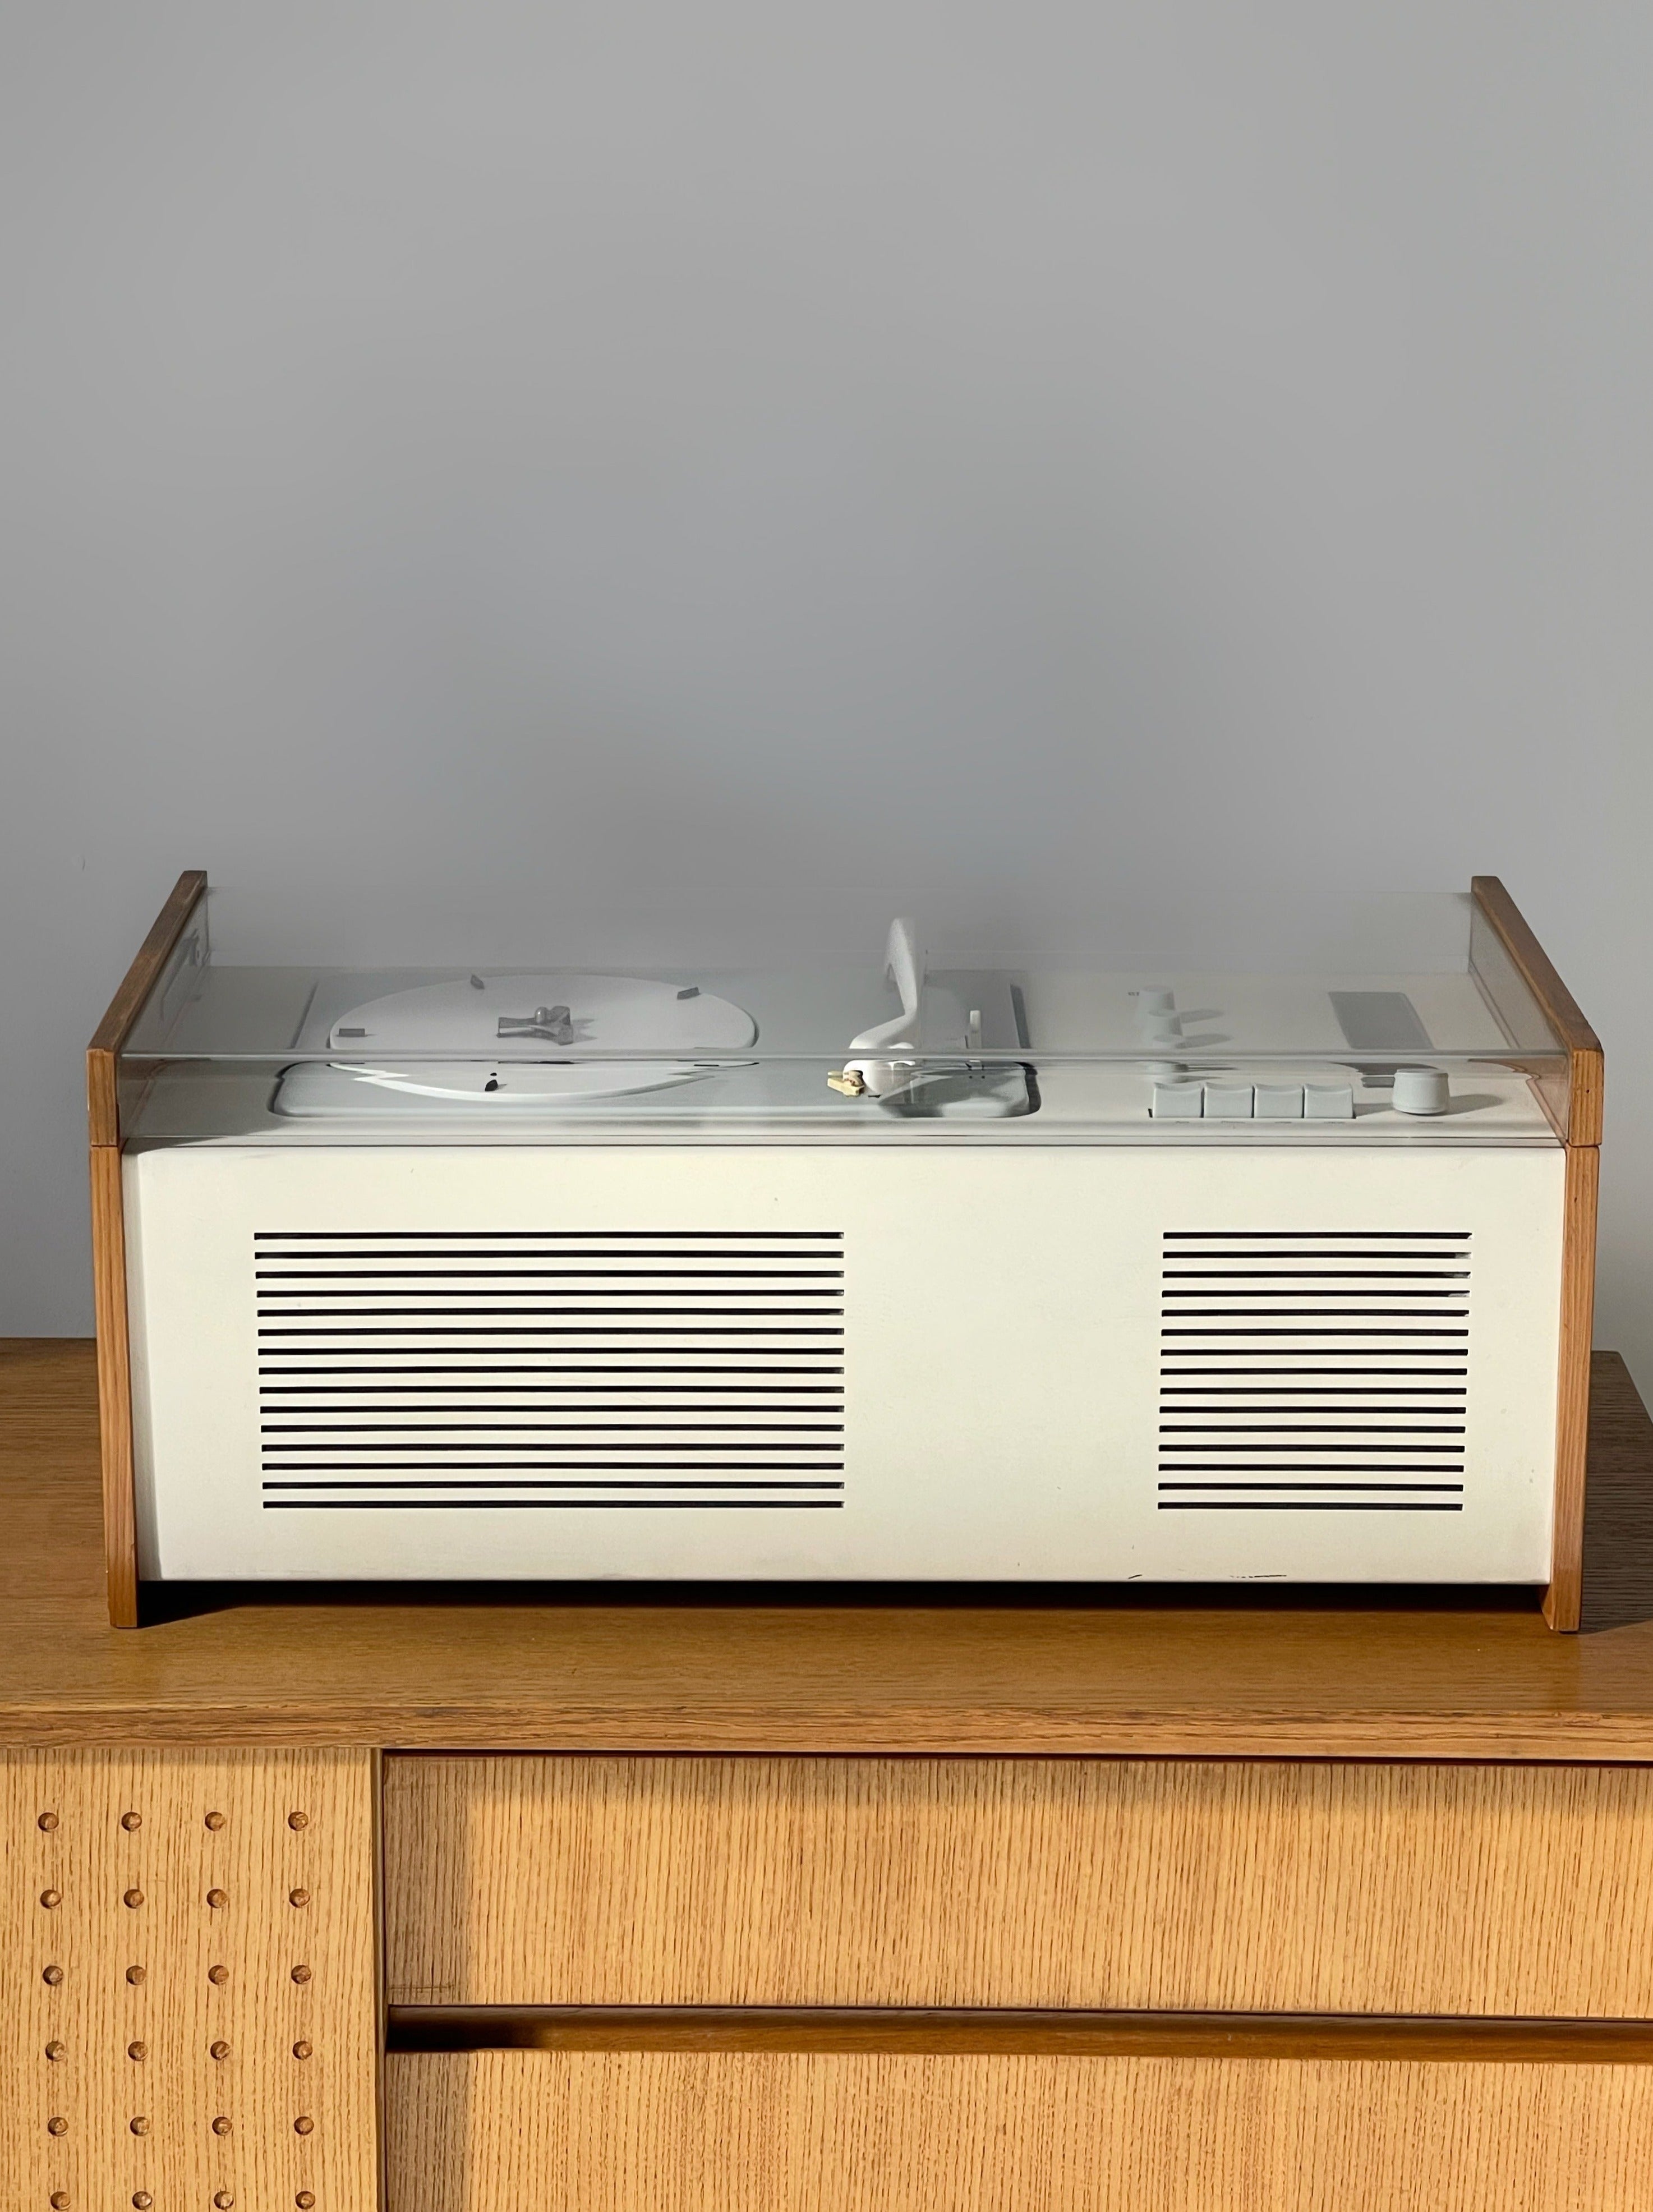 1950s The Braun SK4/1 Record Player by Dieter Rams and Hans Gugelot